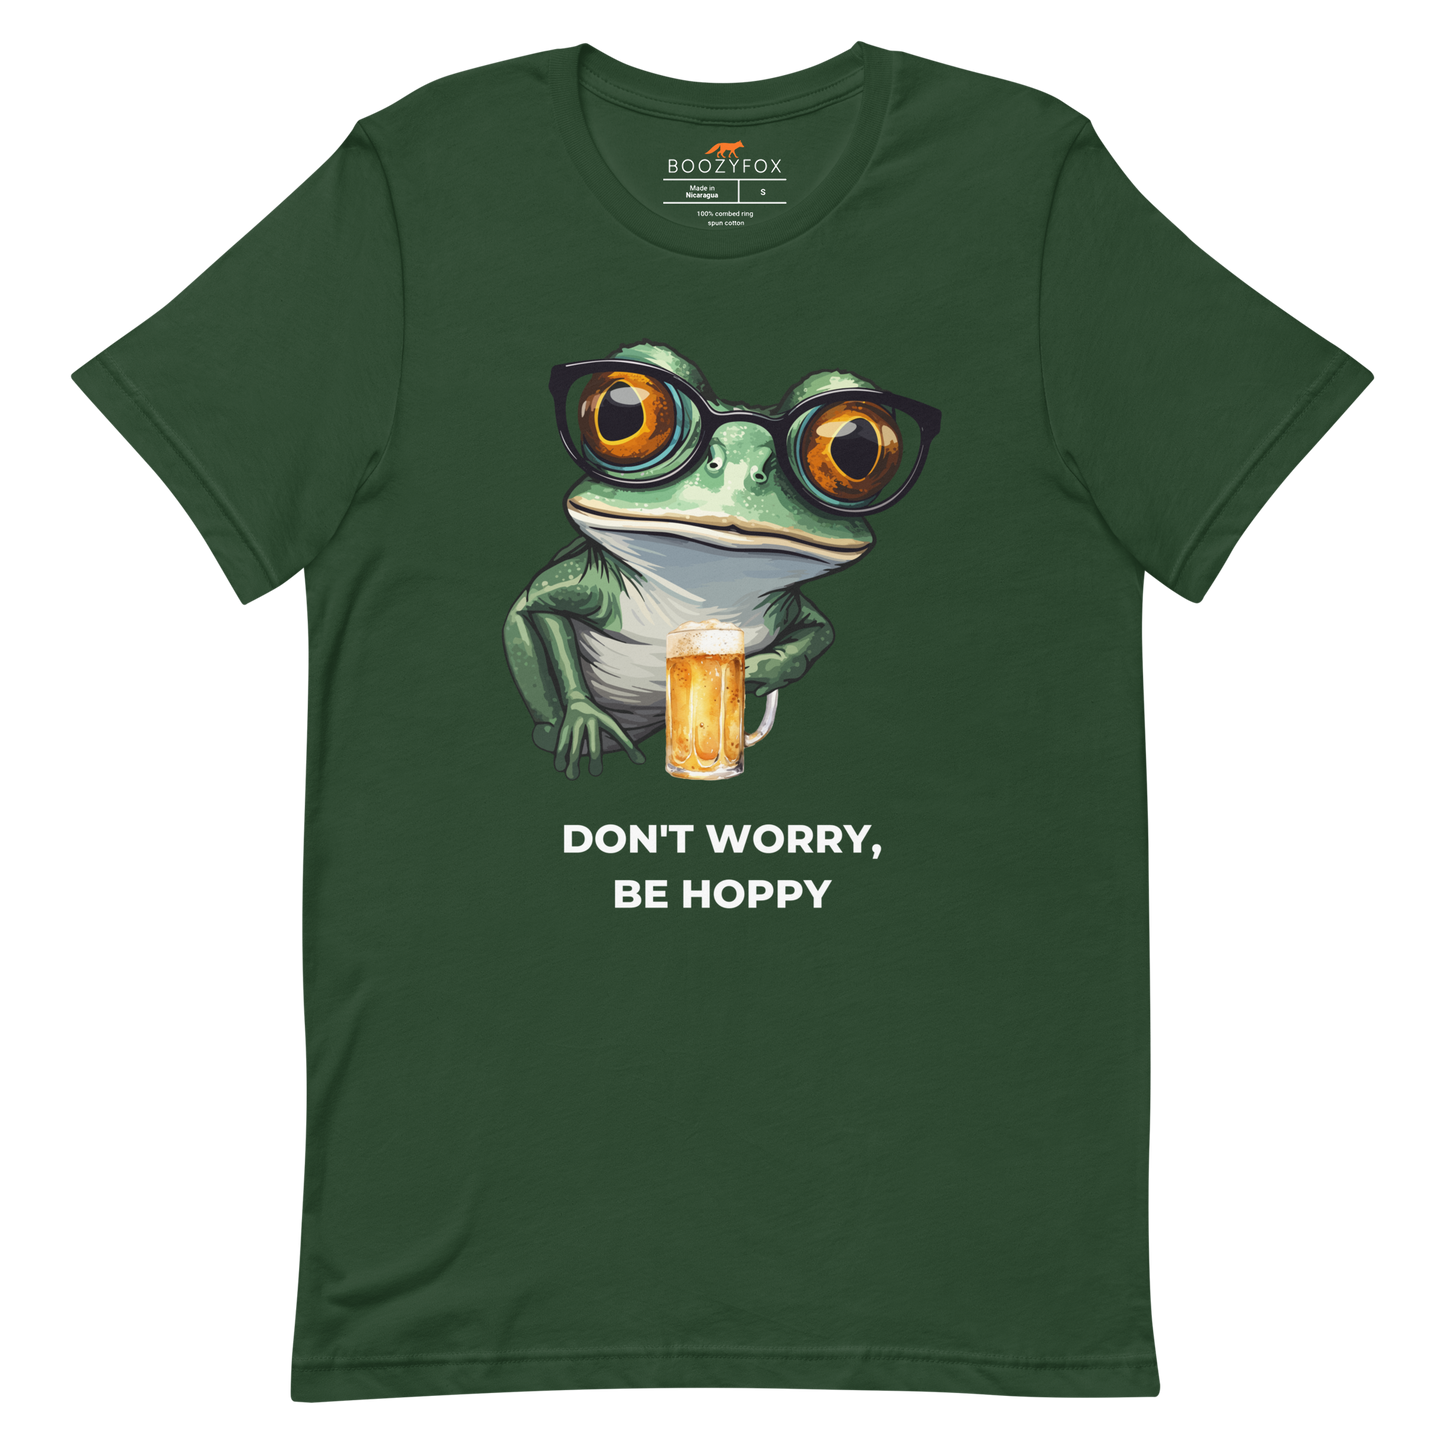 Forest Green Premium Frog Tee featuring a funny Don't Worry, Be Hoppy graphic on the chest - Funny Graphic Frog Tees - Boozy Fox